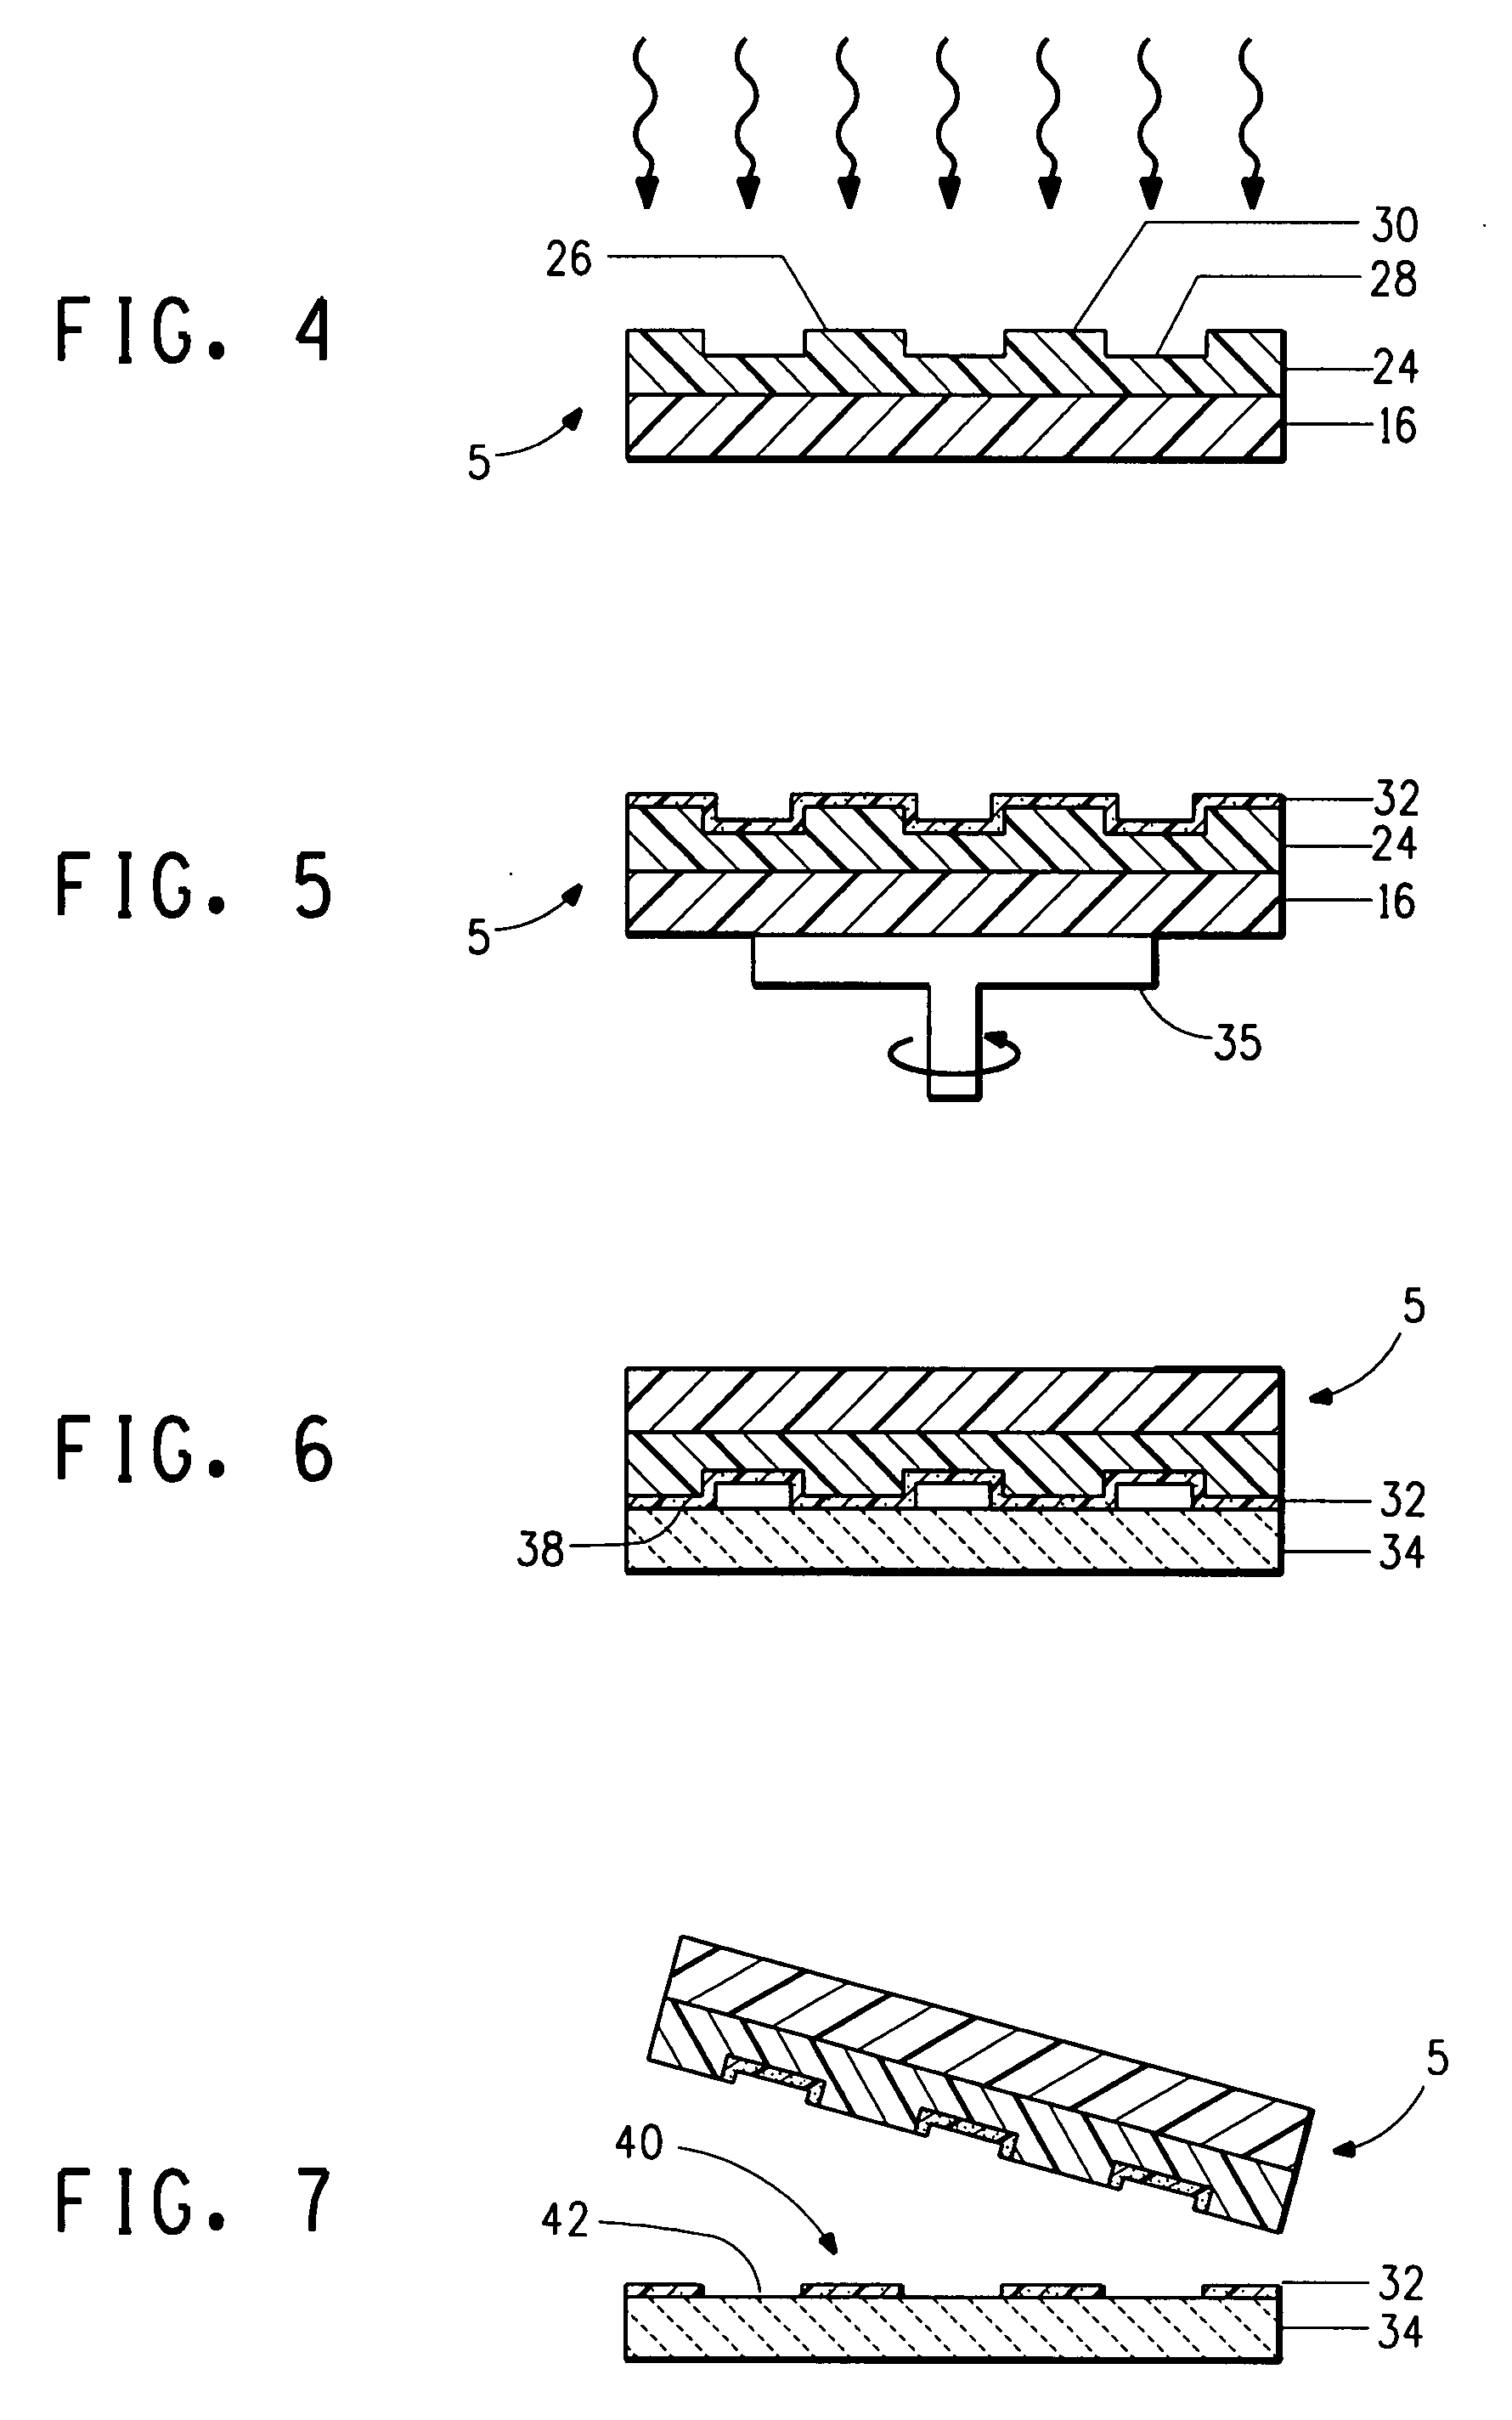 Method to form a pattern of functional material on a substrate by treating a surface of a stamp